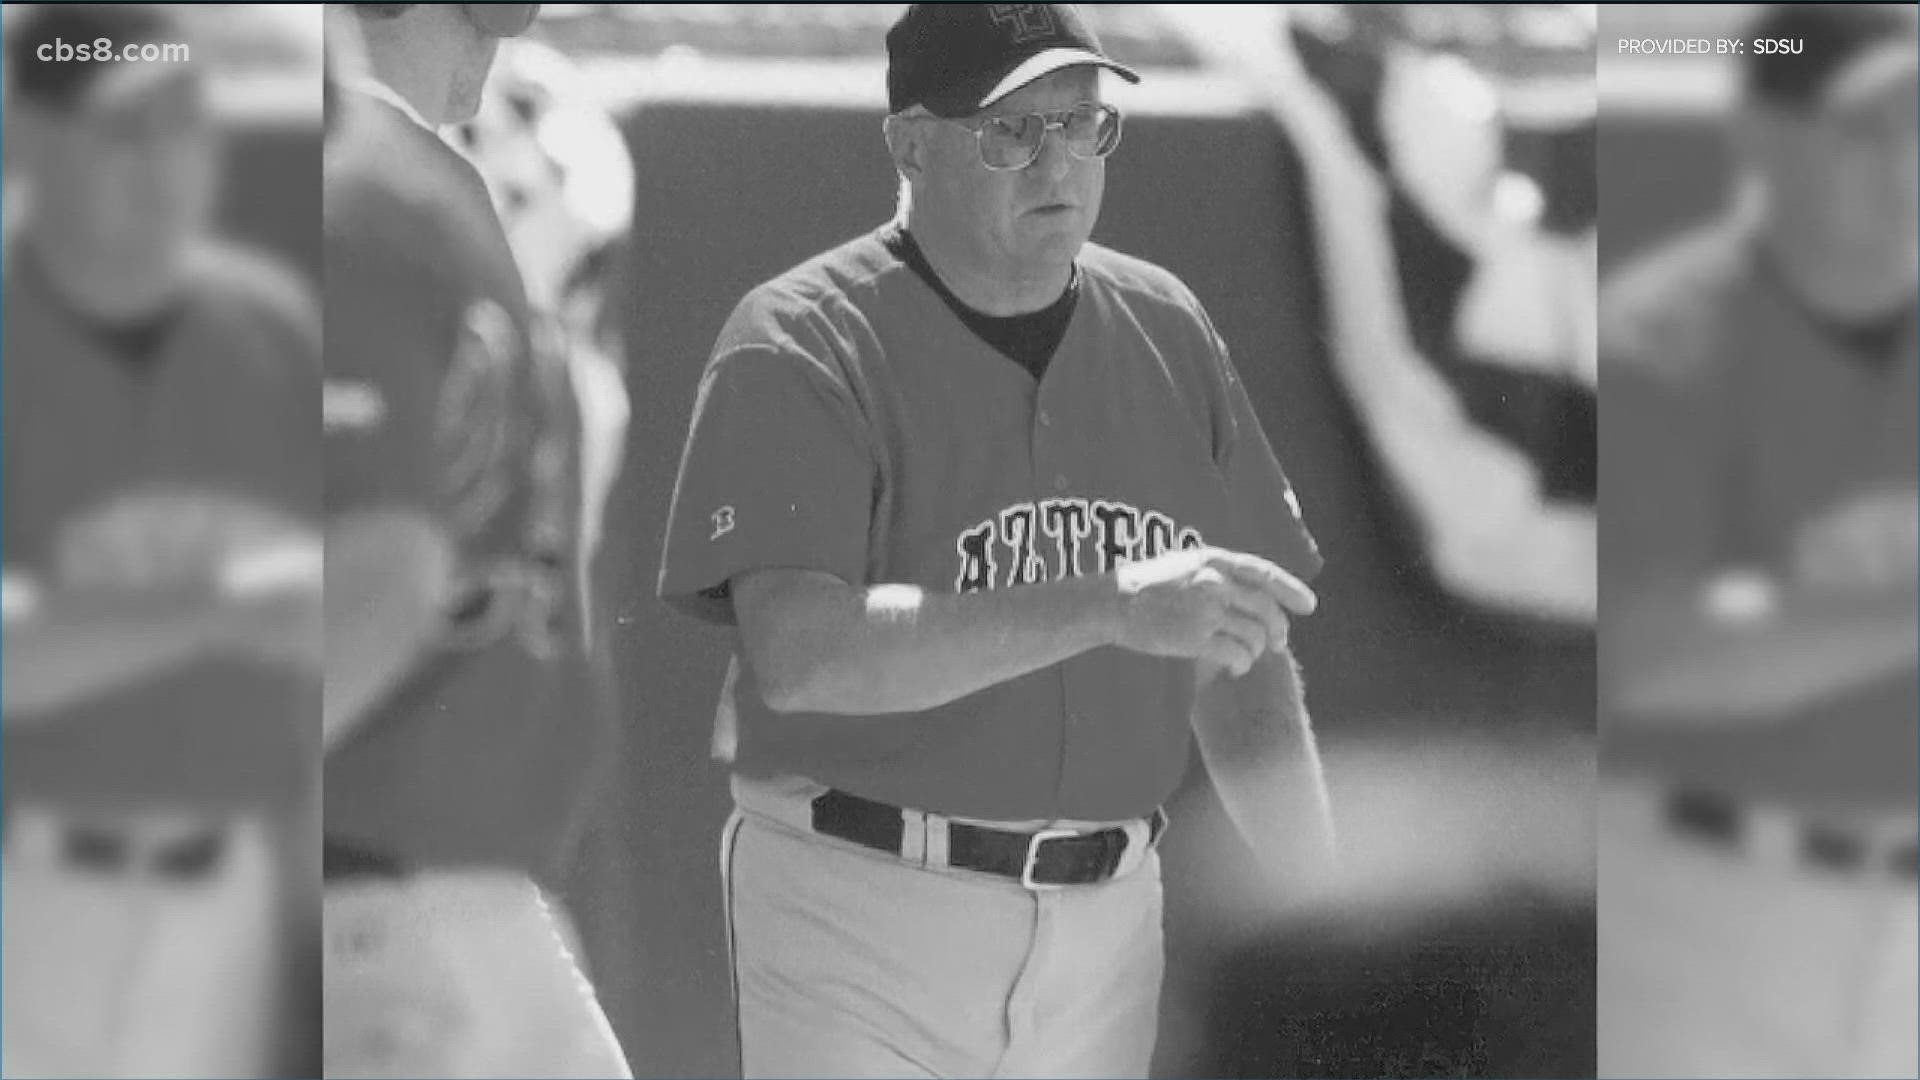 James Clyde Dietz, San Diego State University's head baseball coach from 1972 to 2002, died Sunday in Florence, Ore. He was 83.